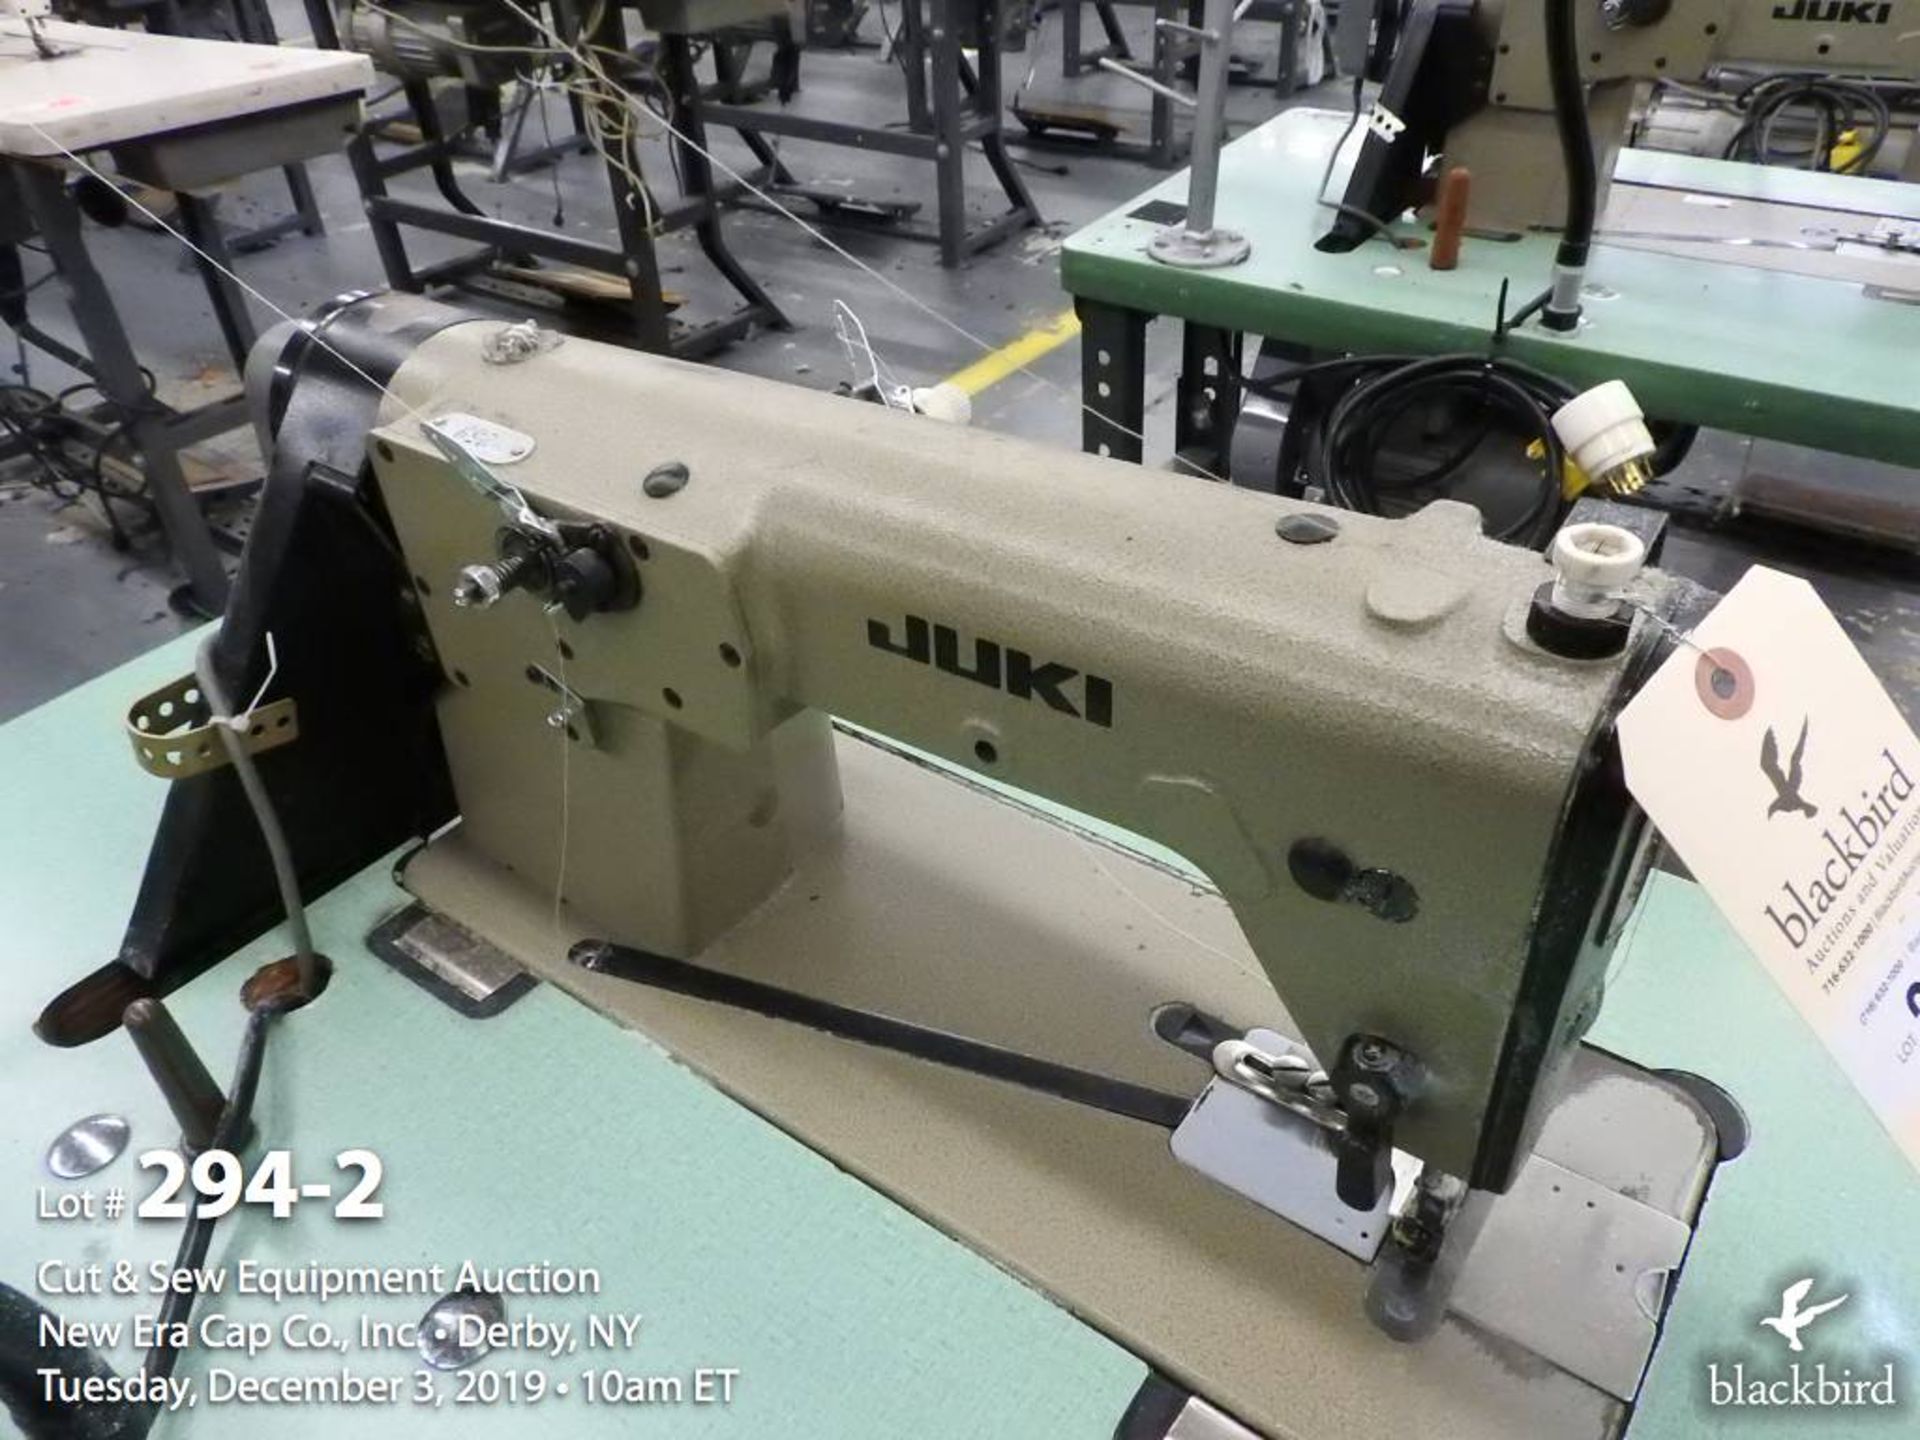 Juki MH-481 Flat-bed single-needle, double chainstitch sewing machine with auto thread trimmer - Image 2 of 4